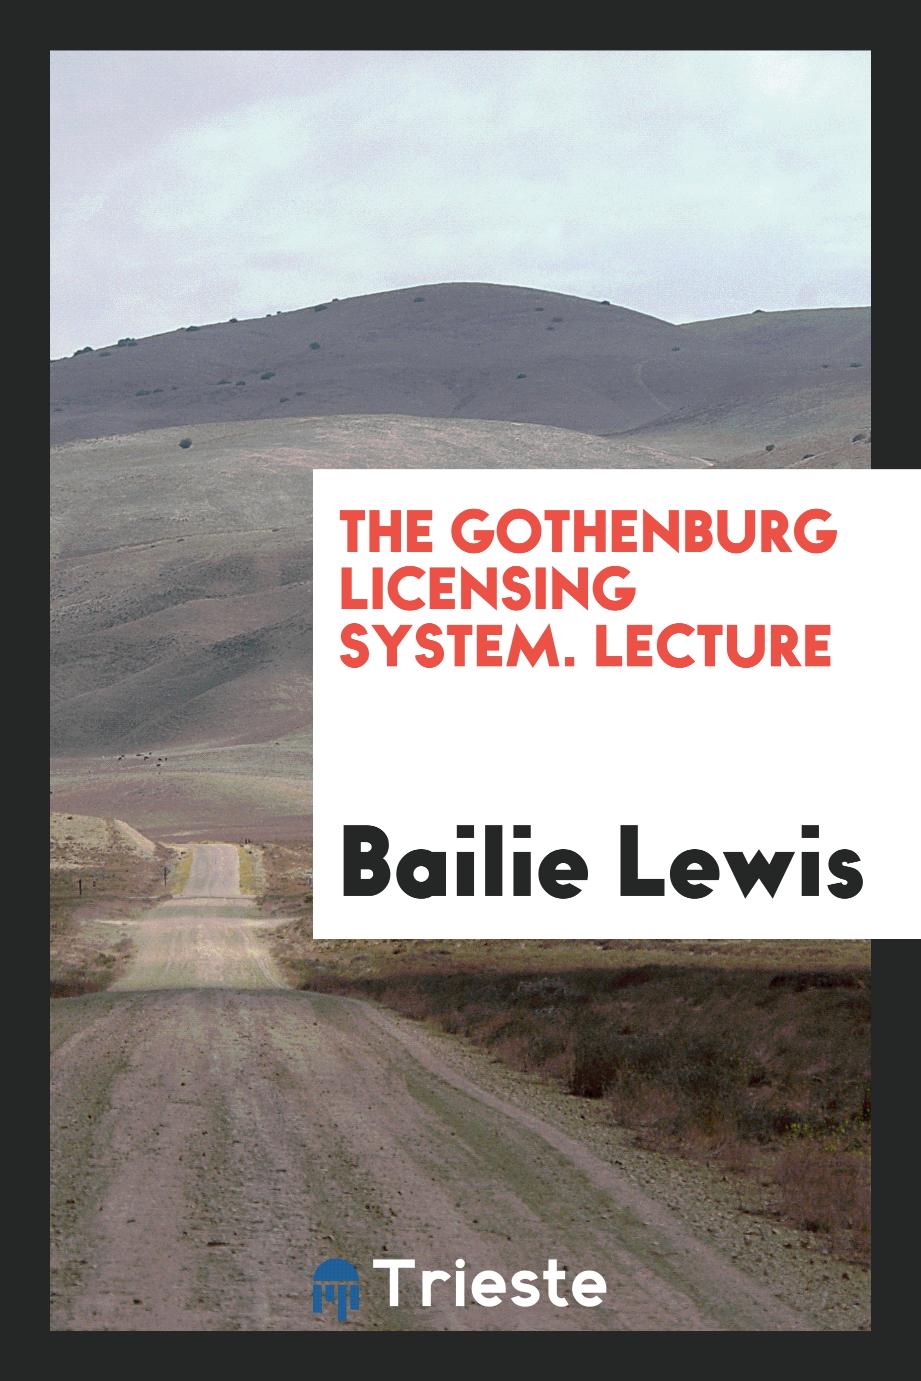 The Gothenburg Licensing System. Lecture